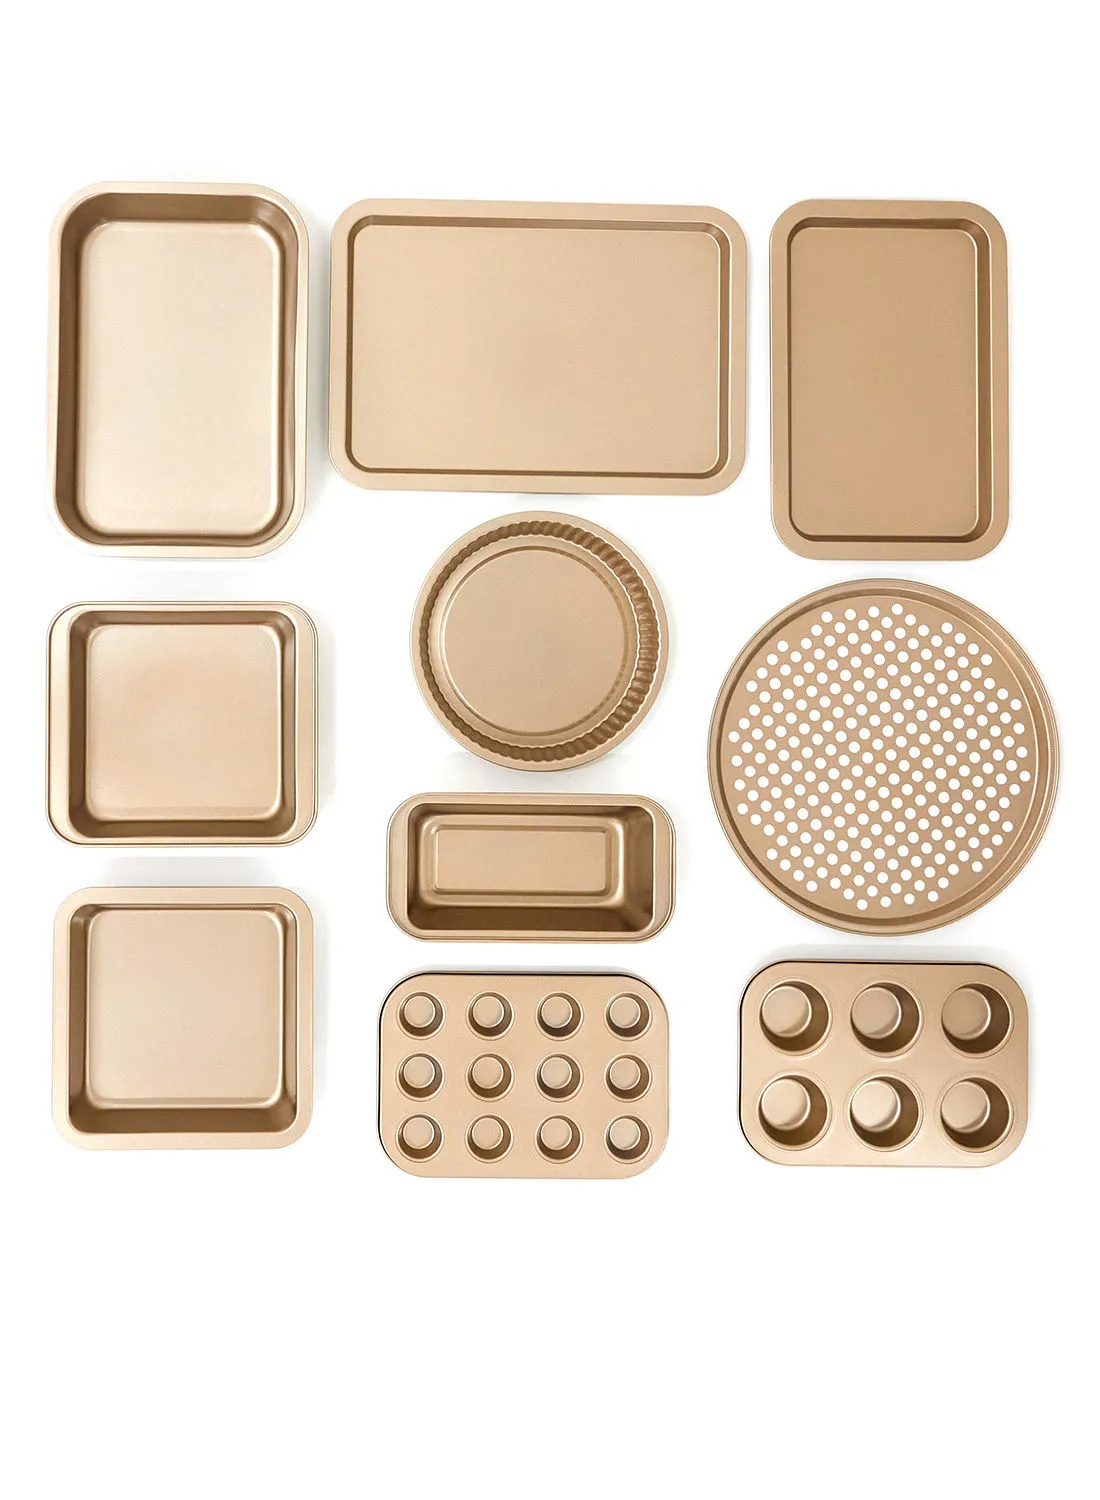 noon east 10 Piece Oven Pan Set - Made Of Carbon Steel - Baking Pan - Oven Trays - Cake Tray - Oven Pan - Cake Mold - Rose Gold